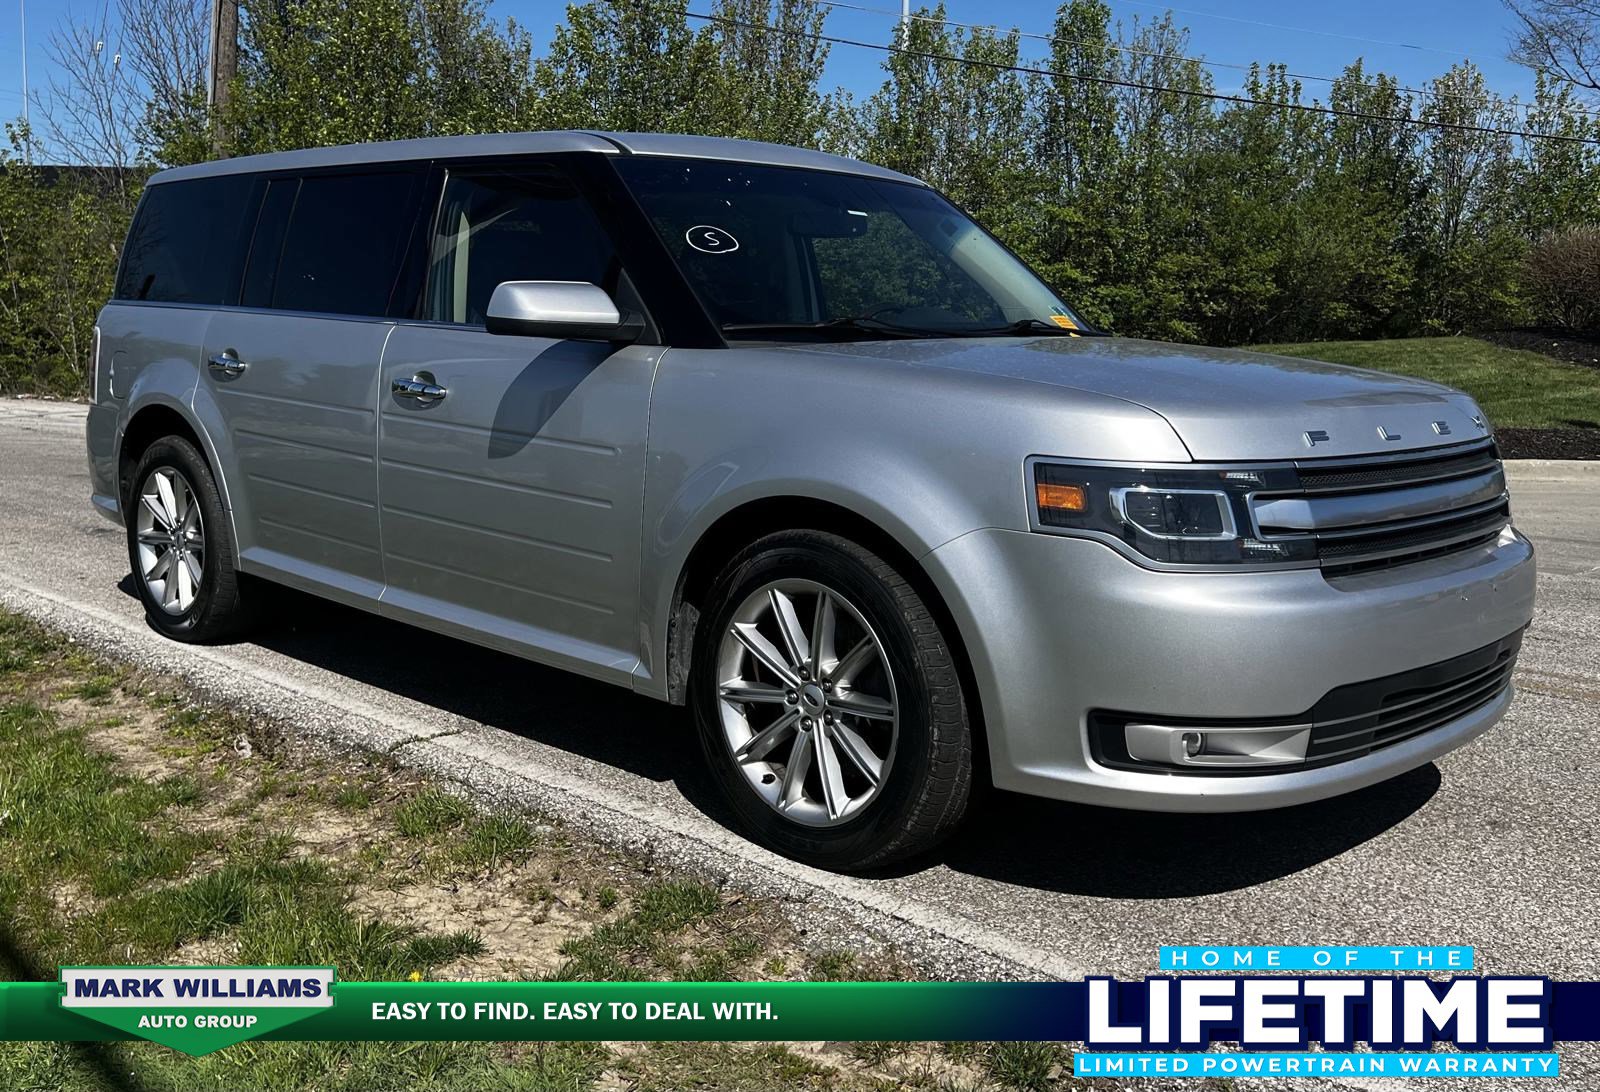 Used Ford Flex for Sale Near Me in Cincinnati, OH - Autotrader